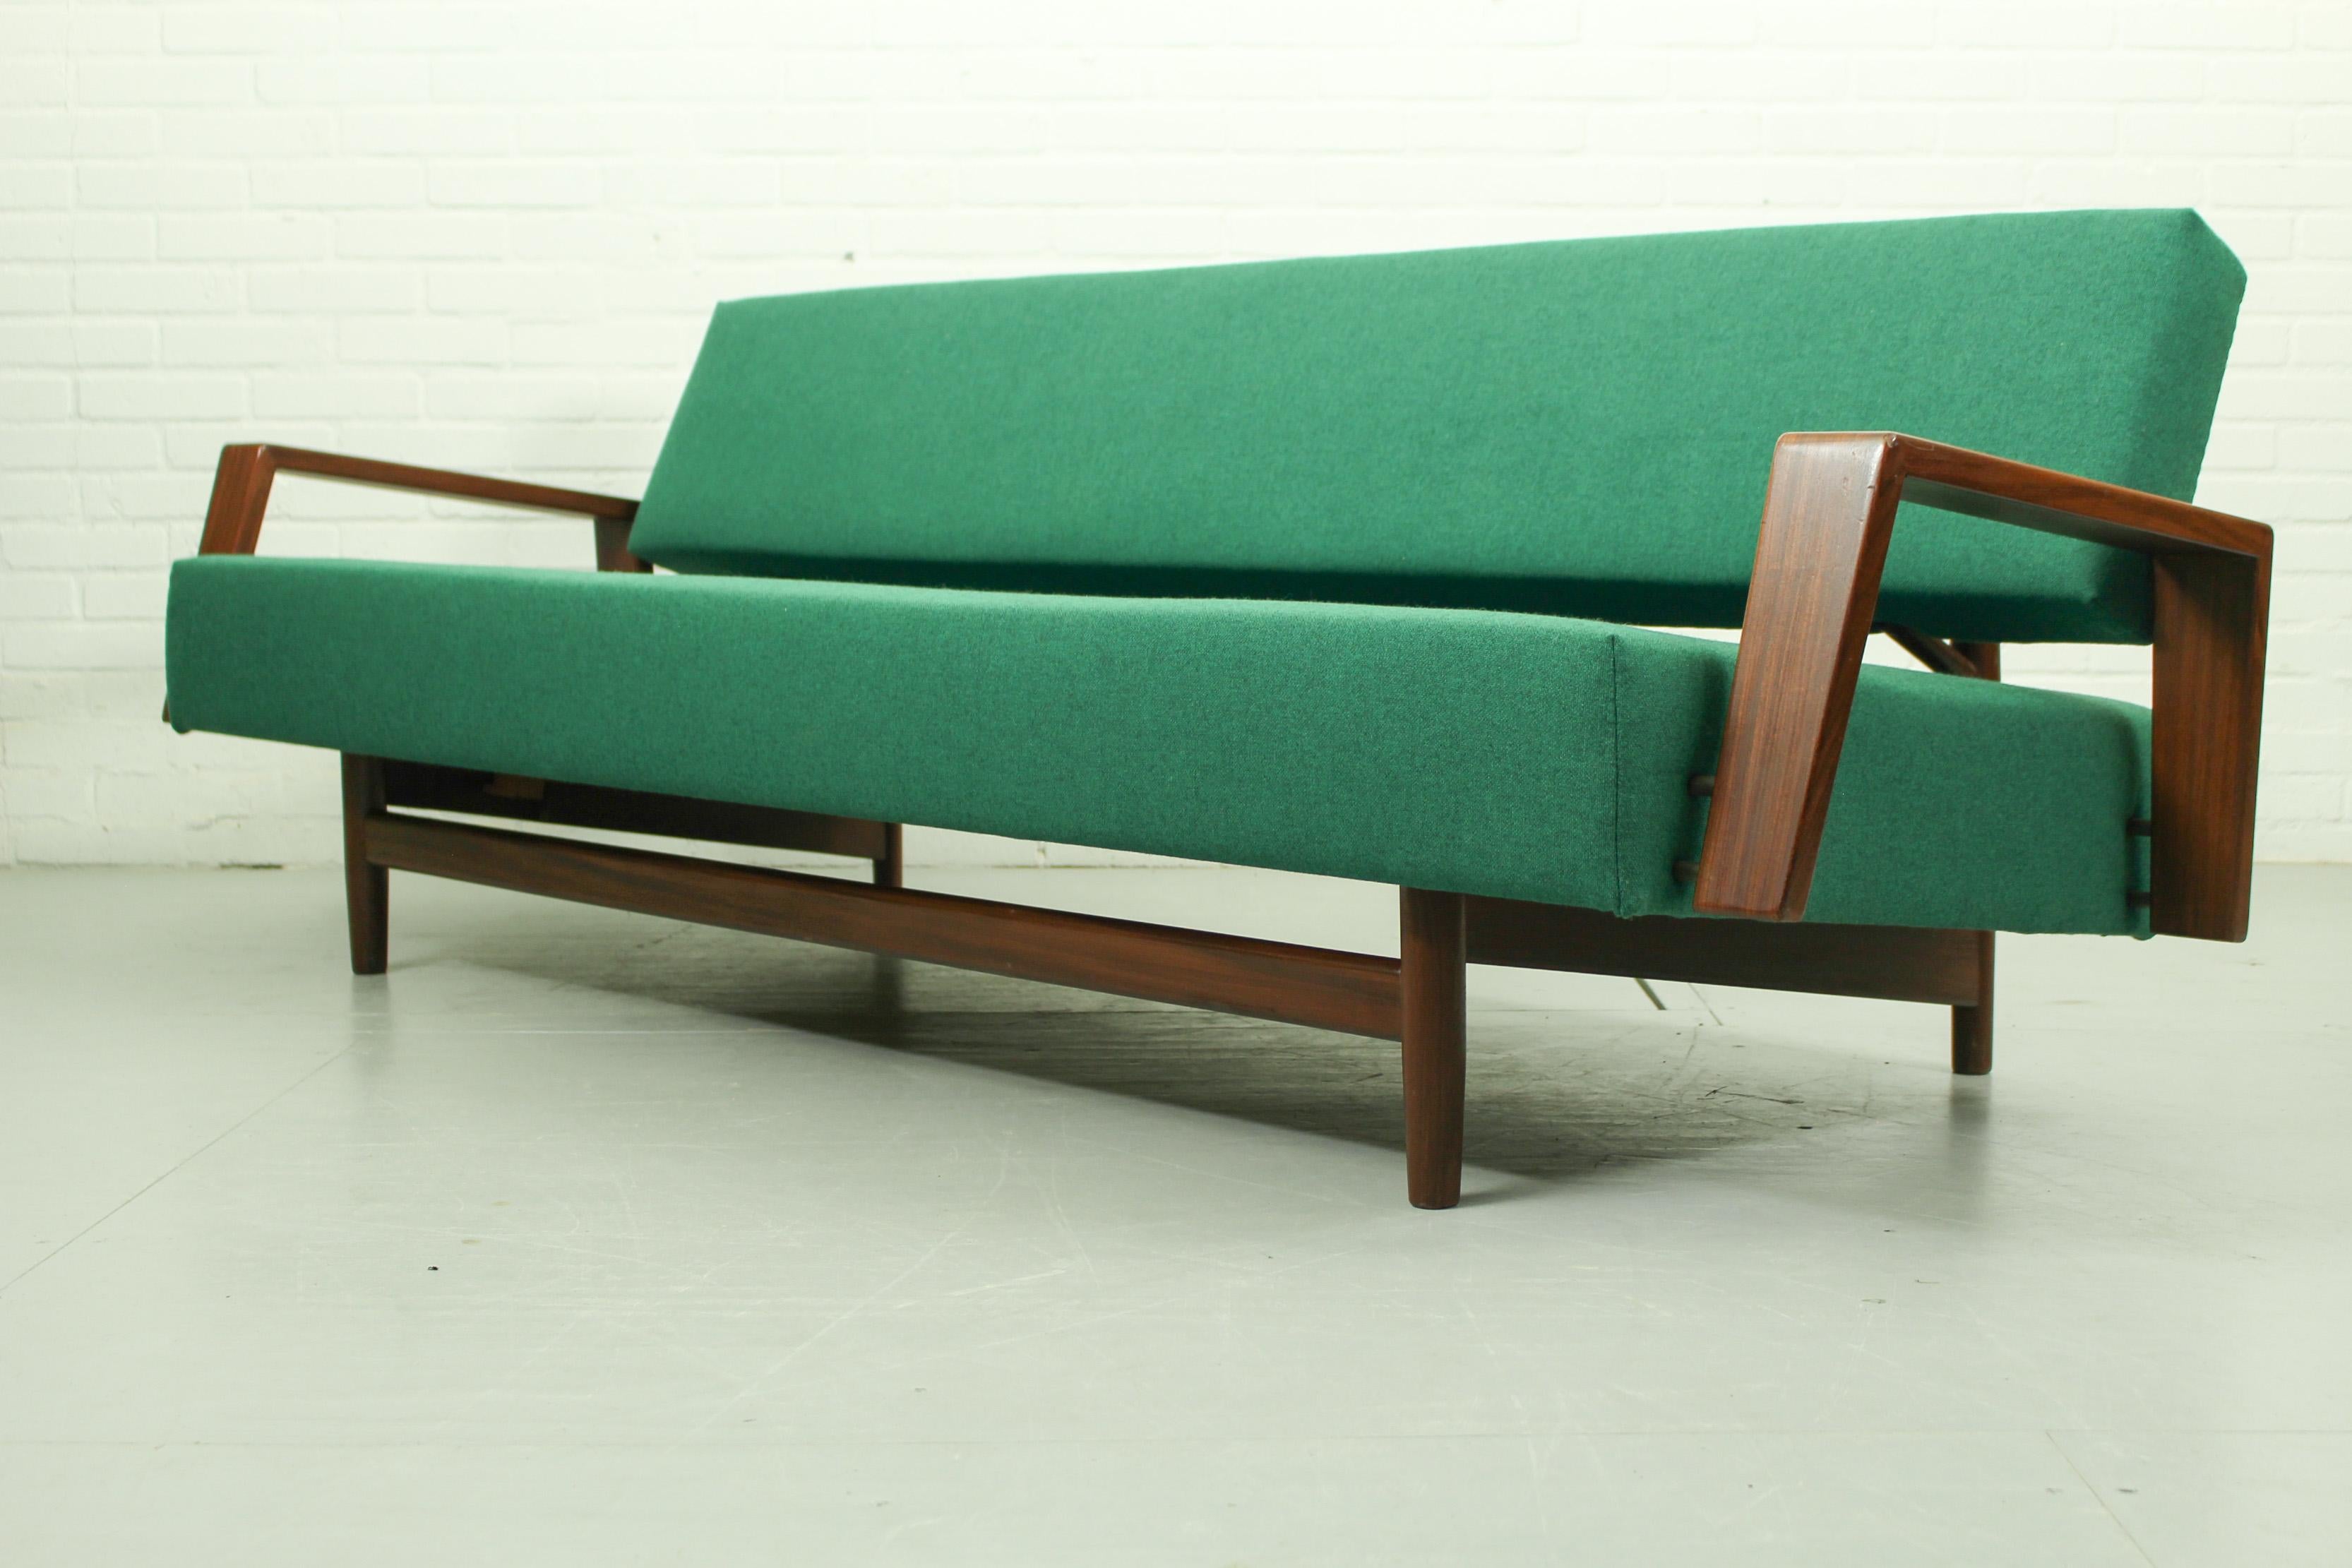 Rare sofa, which can be converted to a bed, by Rob Parry for Gelderland, 1958. The sofa can be changed to a bed very easily. New Kvadrat Tonica upholstery in green. This sofa was in production for one year only and is very hard to find. This one is